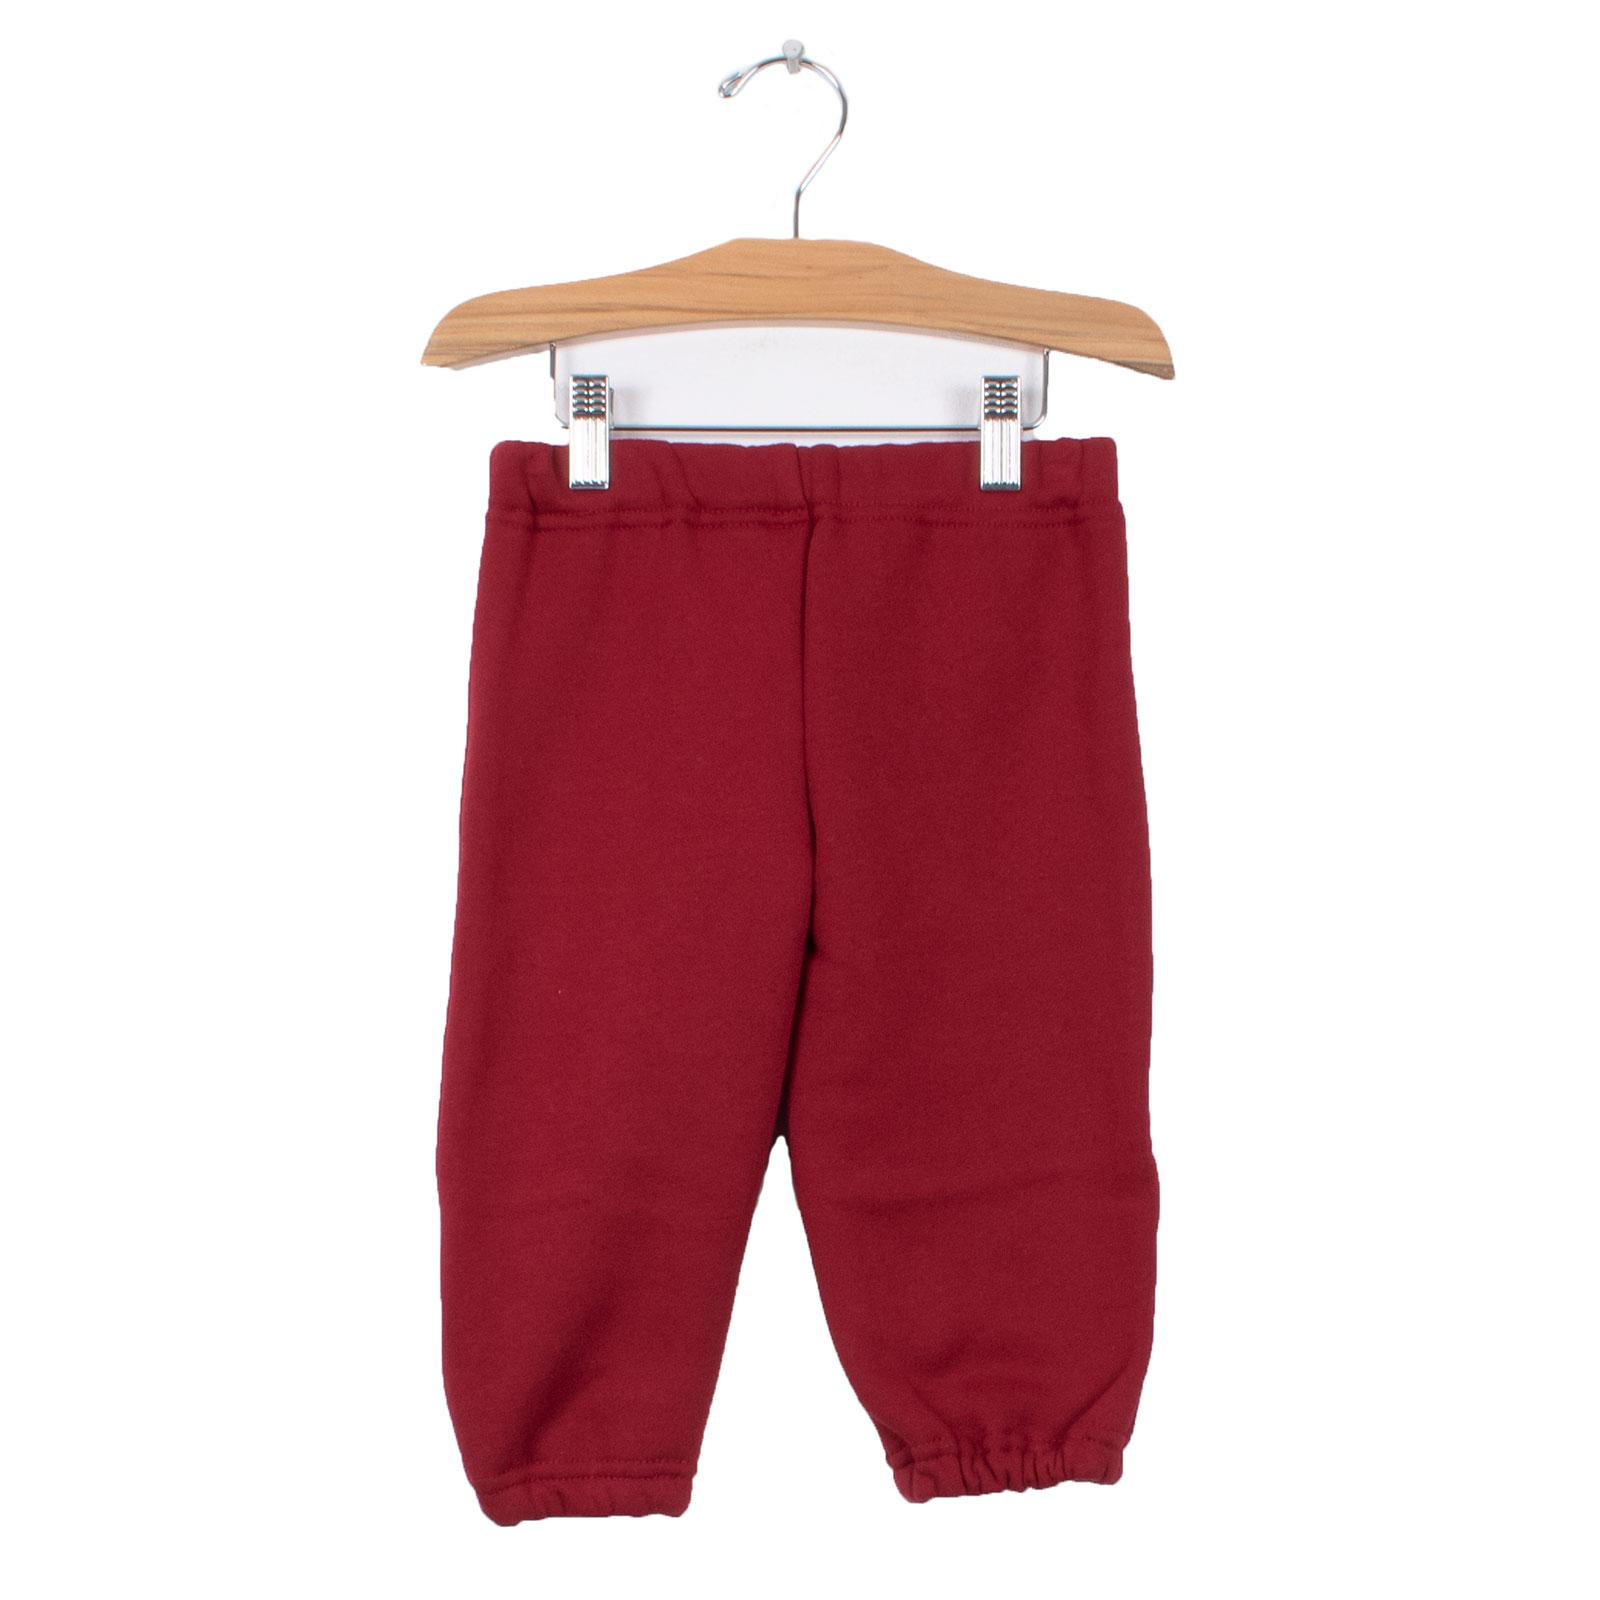 USC Arch Toddler TT Pant Oxford image41